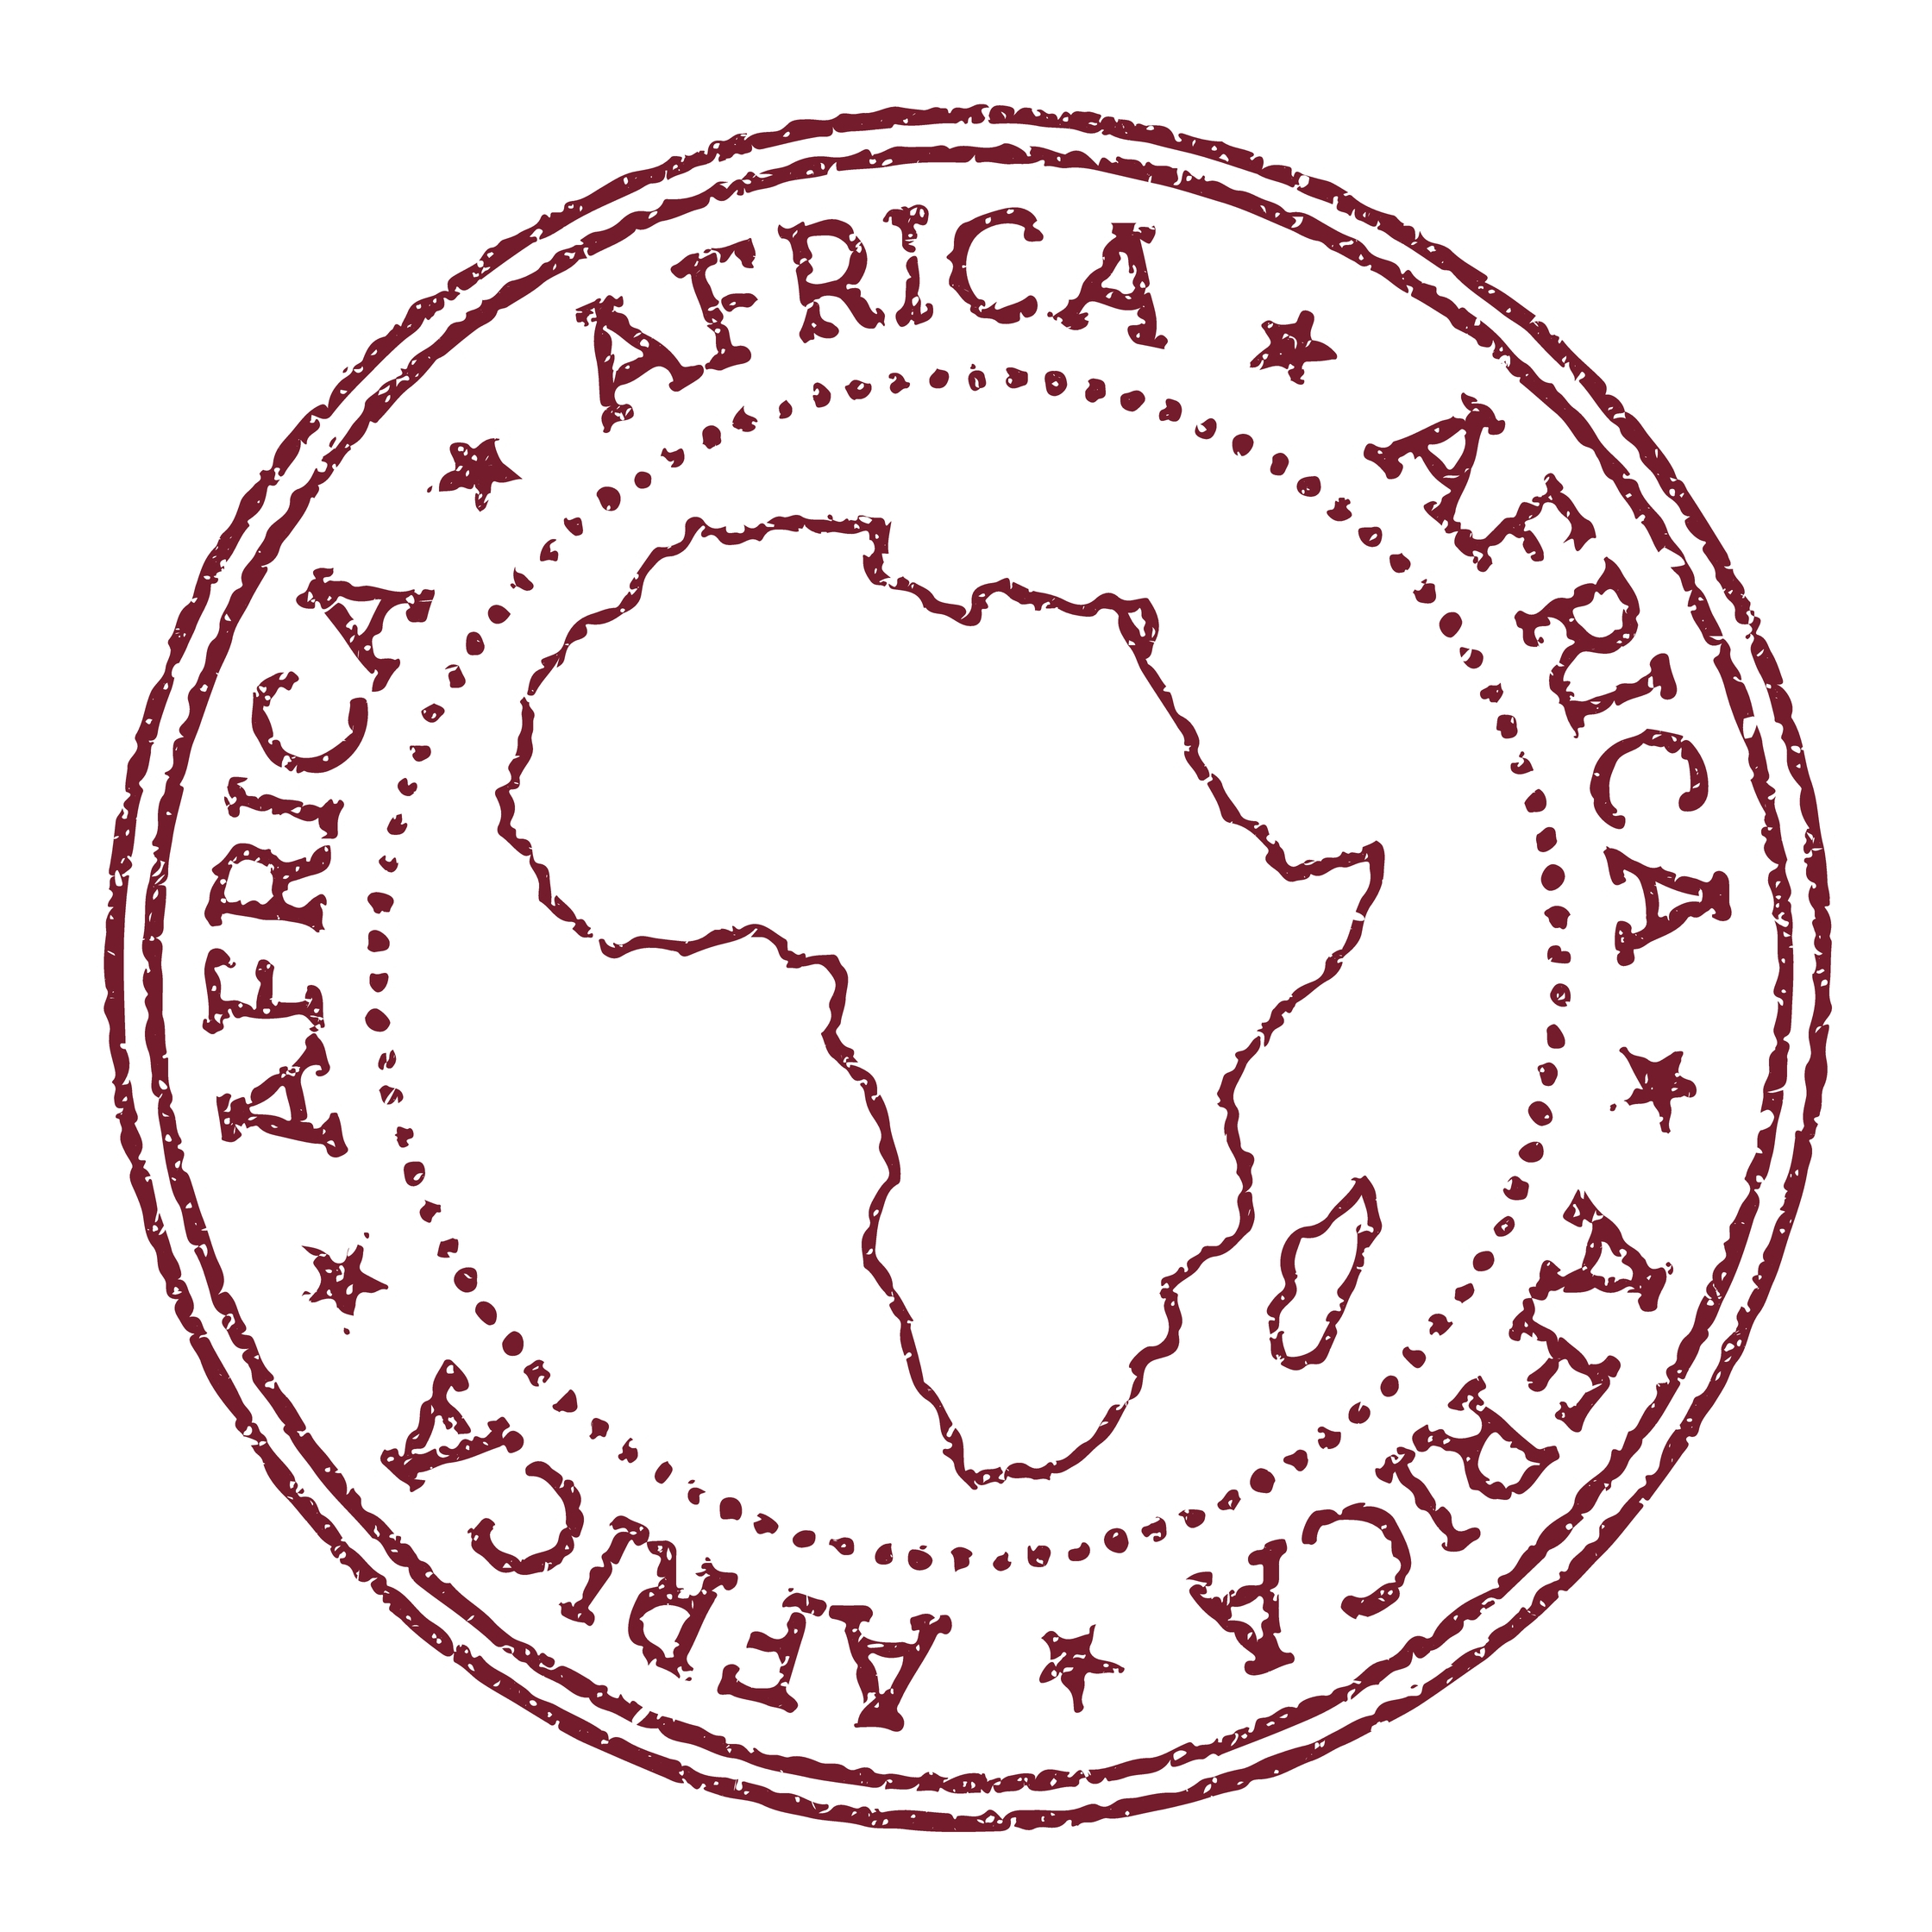 Destinations Round Rubber Postage Stamp, with an outline of the continent in the centre, and the word Africa written around the edge of the circle.